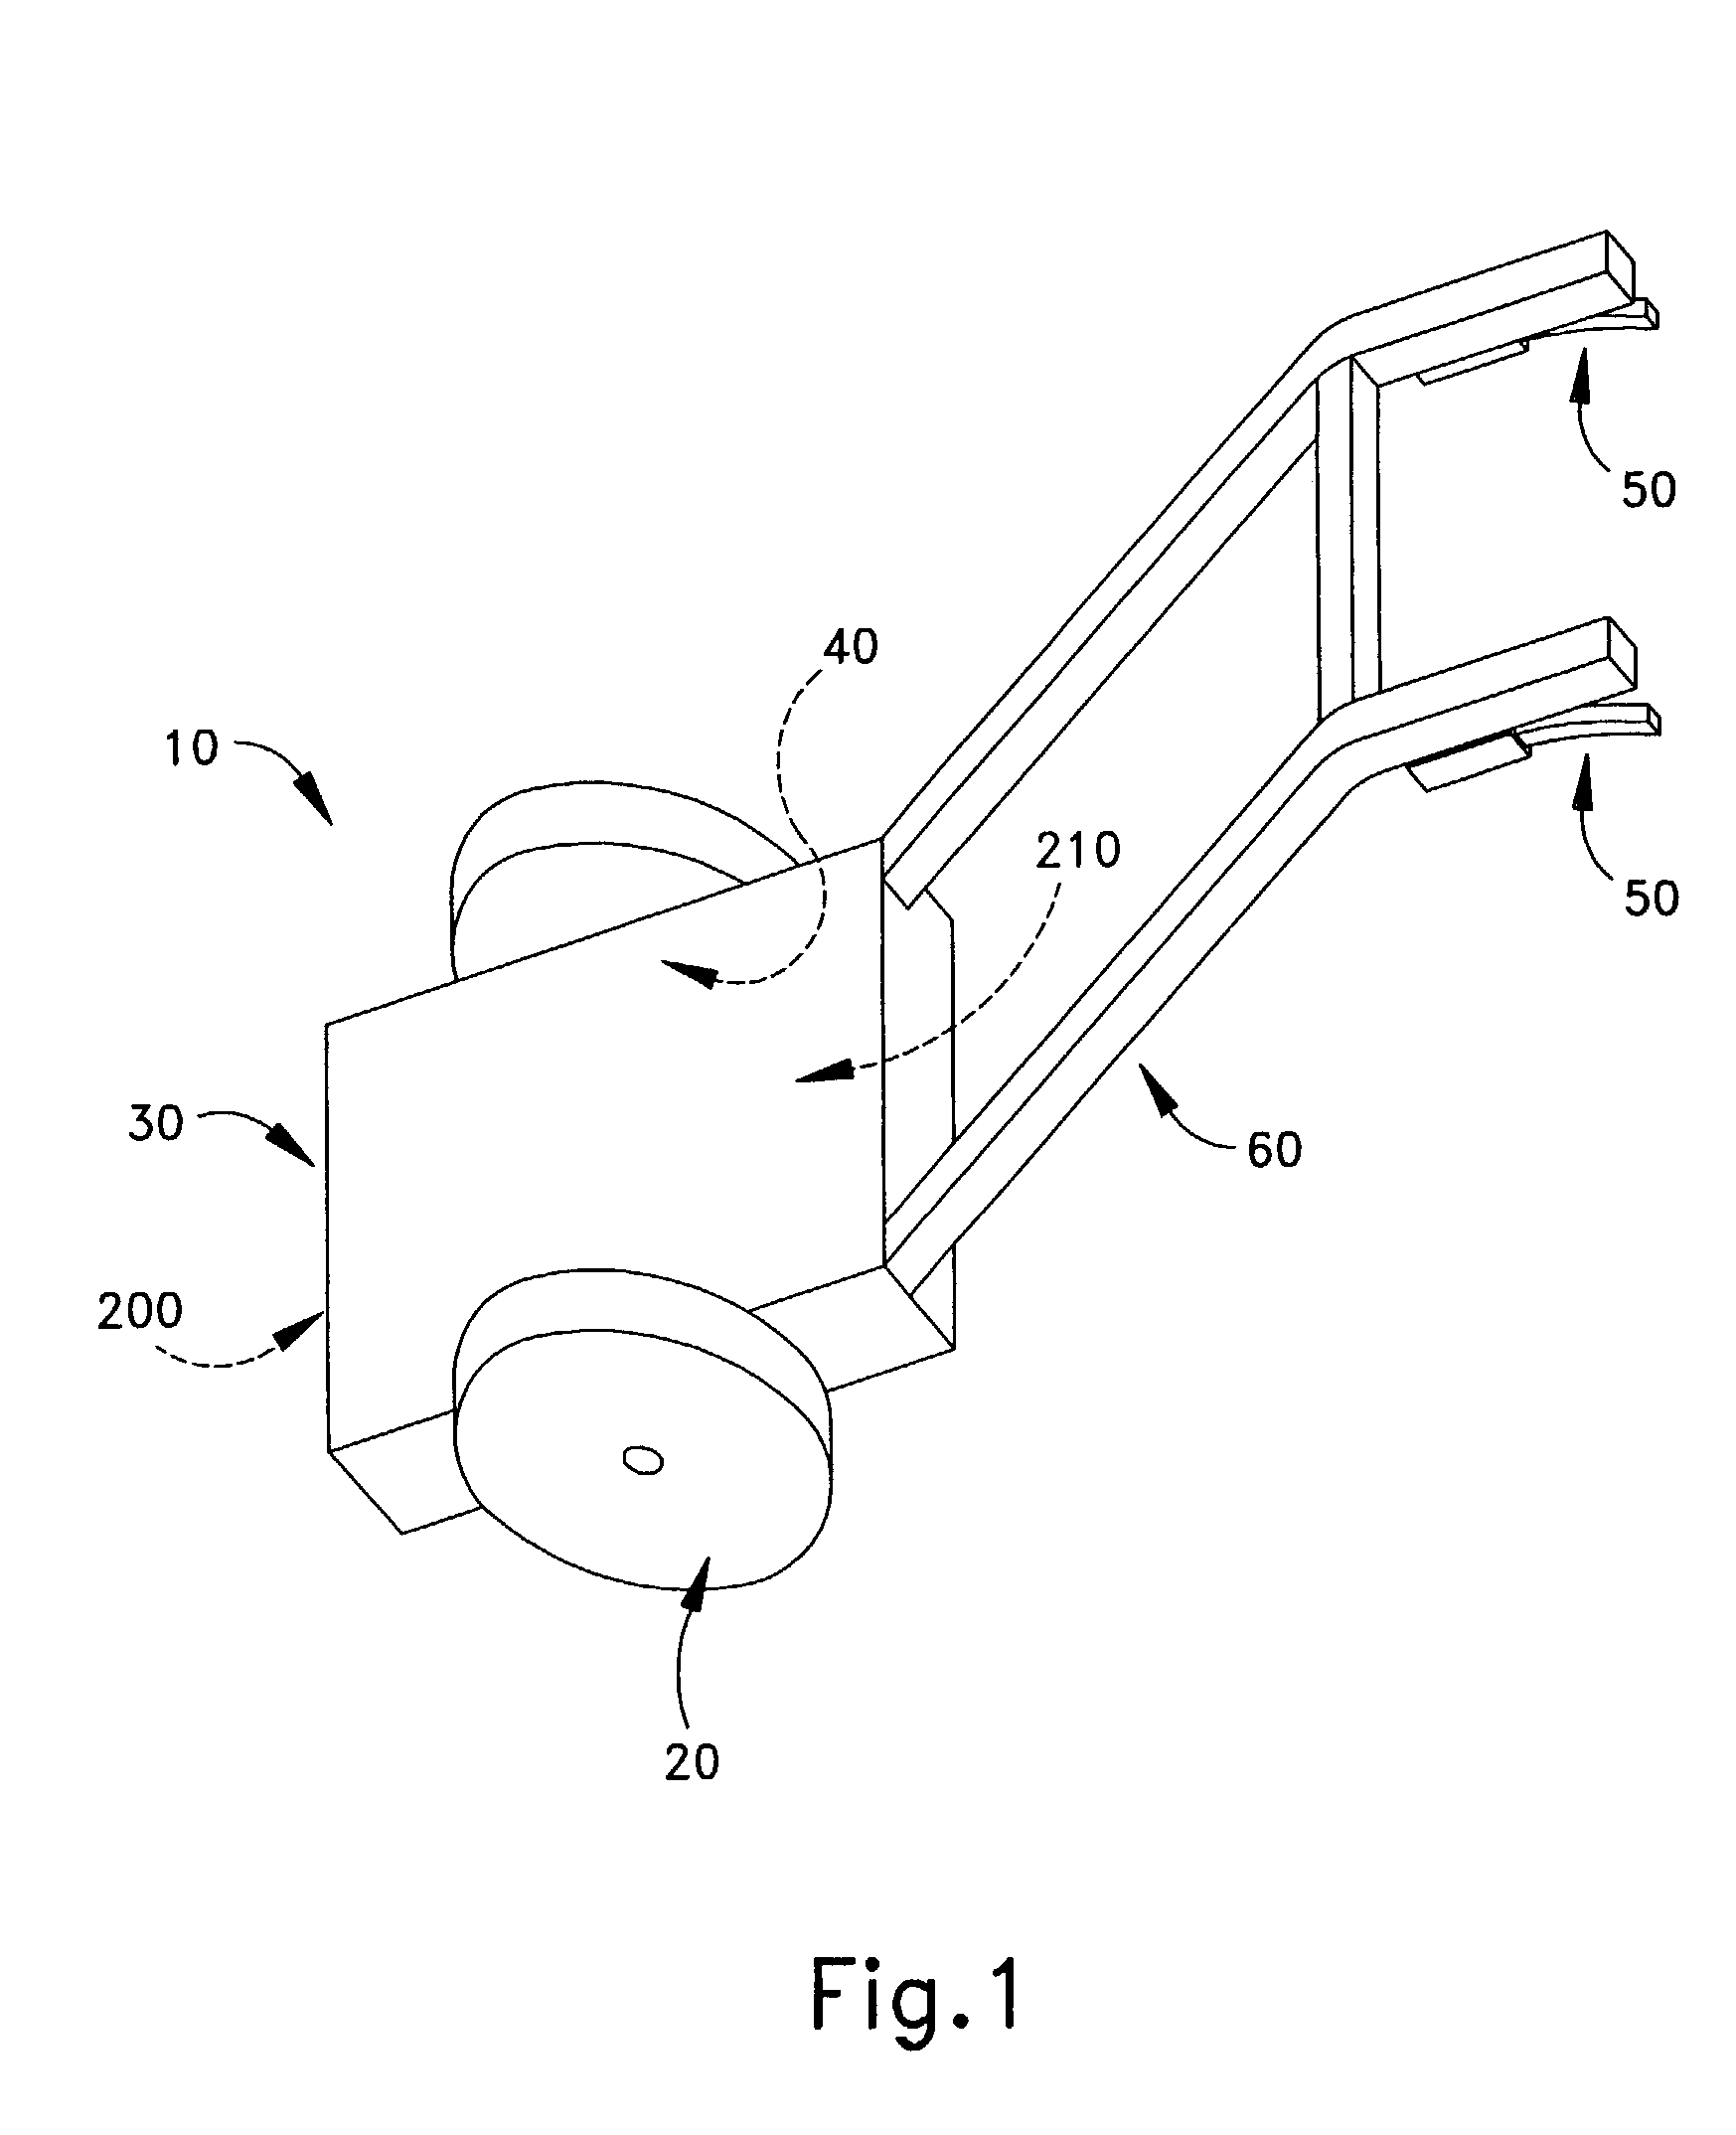 Selectably engageable clutch for a device